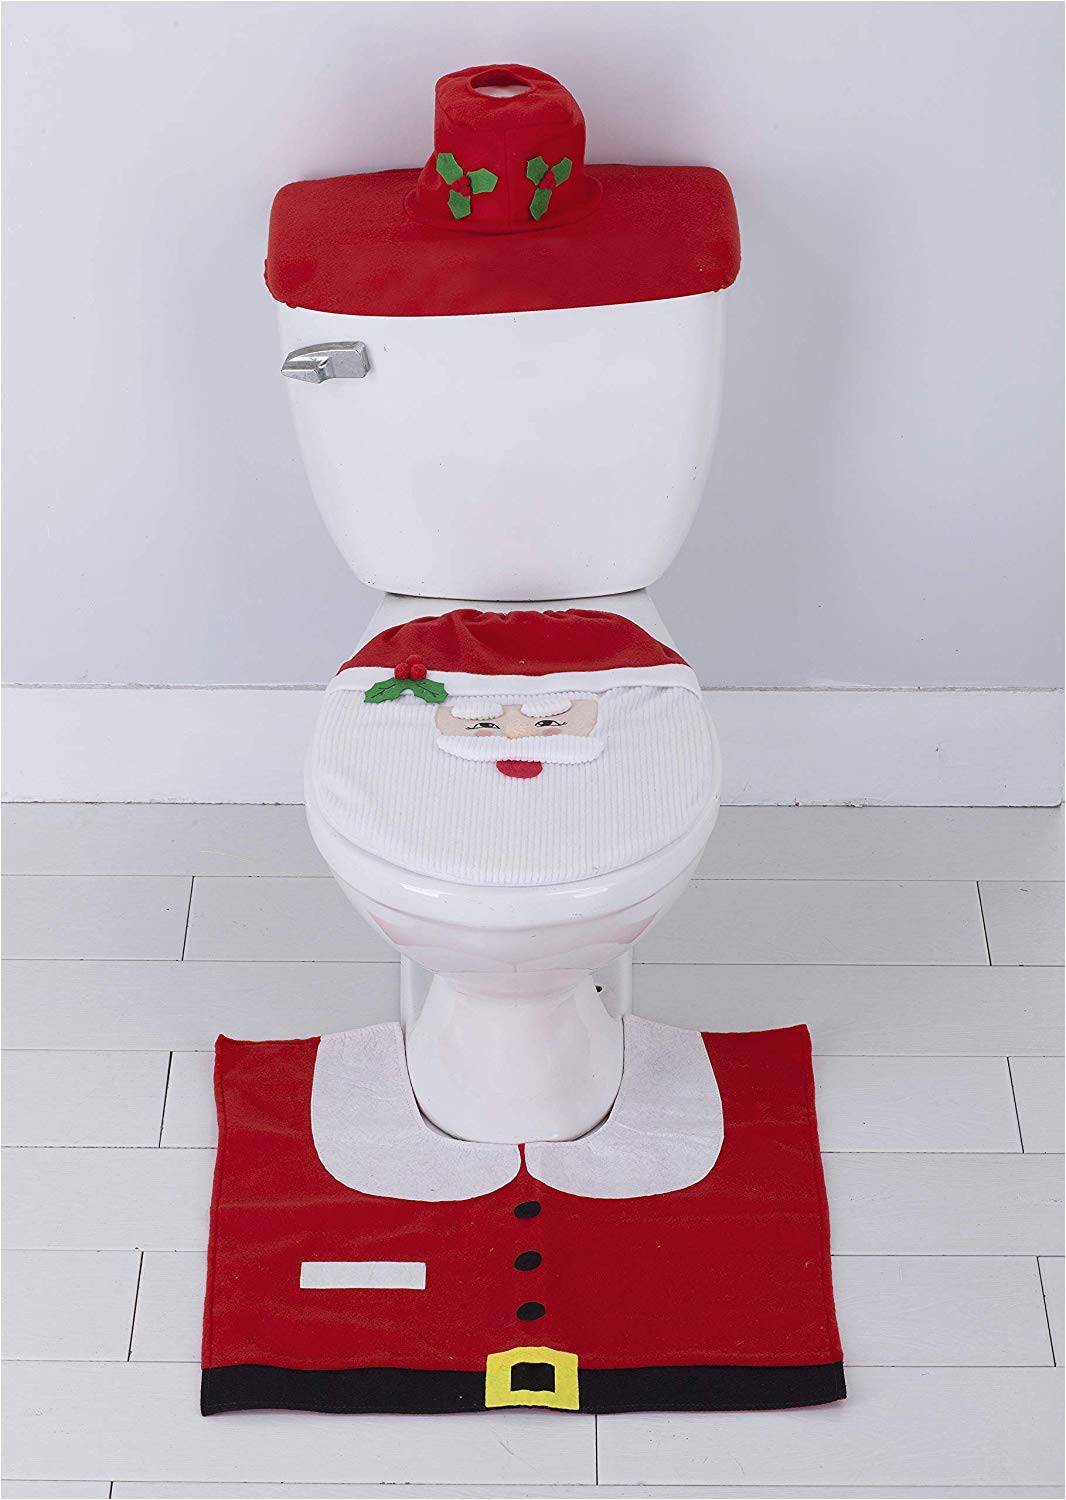 Christmas Bath Rugs Accessories Kashi Home Holiday Christmas Decoration 3pc Bathroom Accessory Set Contour Rug toilet Seat Lid Cover Tank Cover with Tissue Box Holder Santa